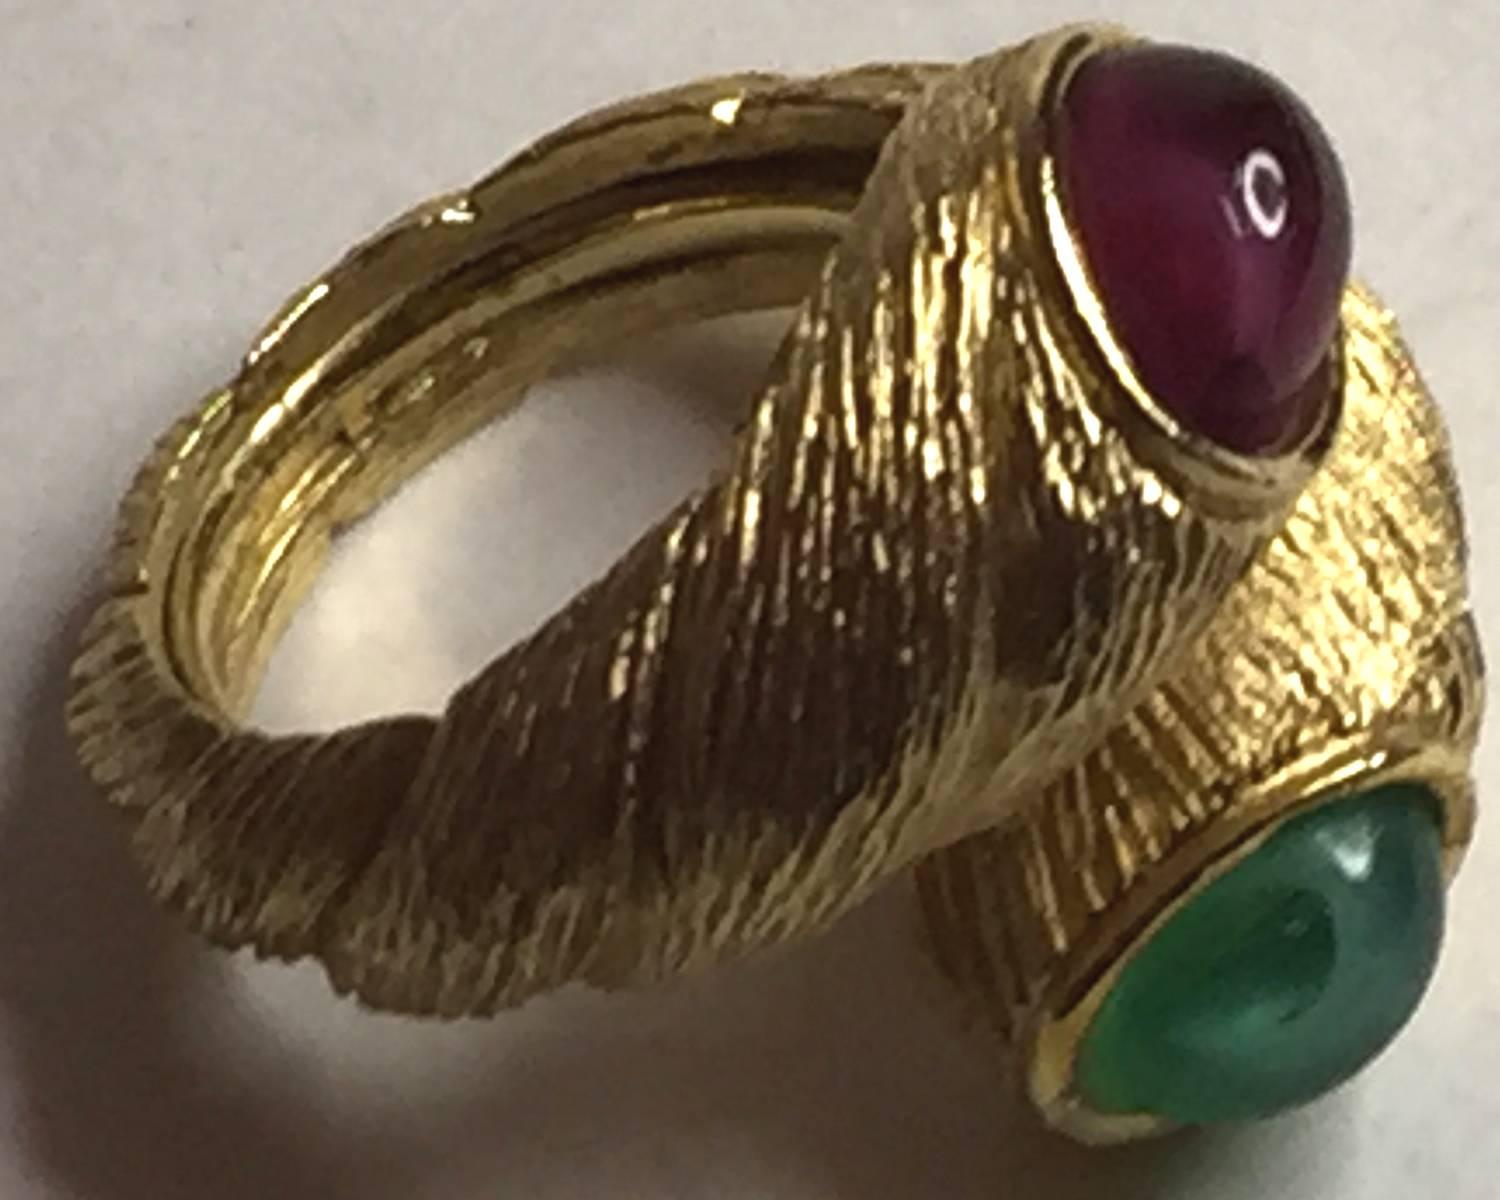 This listing is ONLY for the 1960s TRIFARI Brushed goldtone ring embellished with scored detail and gem tone faux ruby and emerald cabochon stonework. Approximately 1